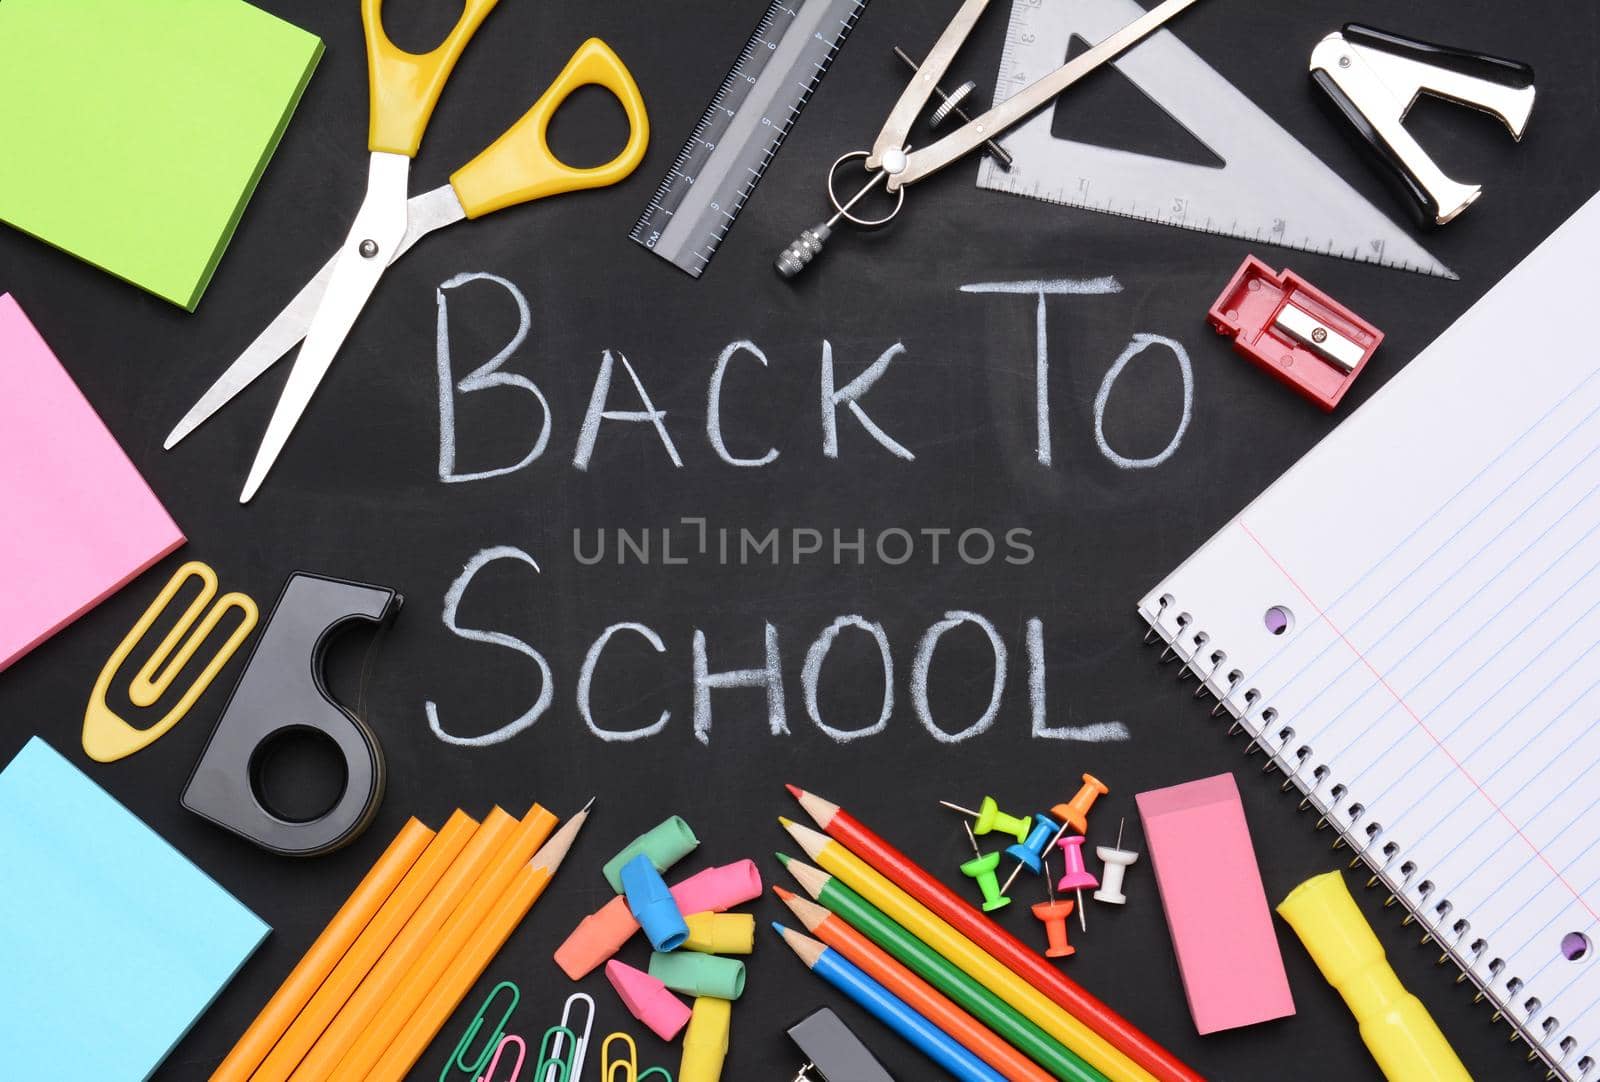 Back to school written on a chalkboard. The words are surrounded by school supplies including, paper, scissors, pencils, erasers, paper clips, compass, ruler, push pins and other necessities for students.